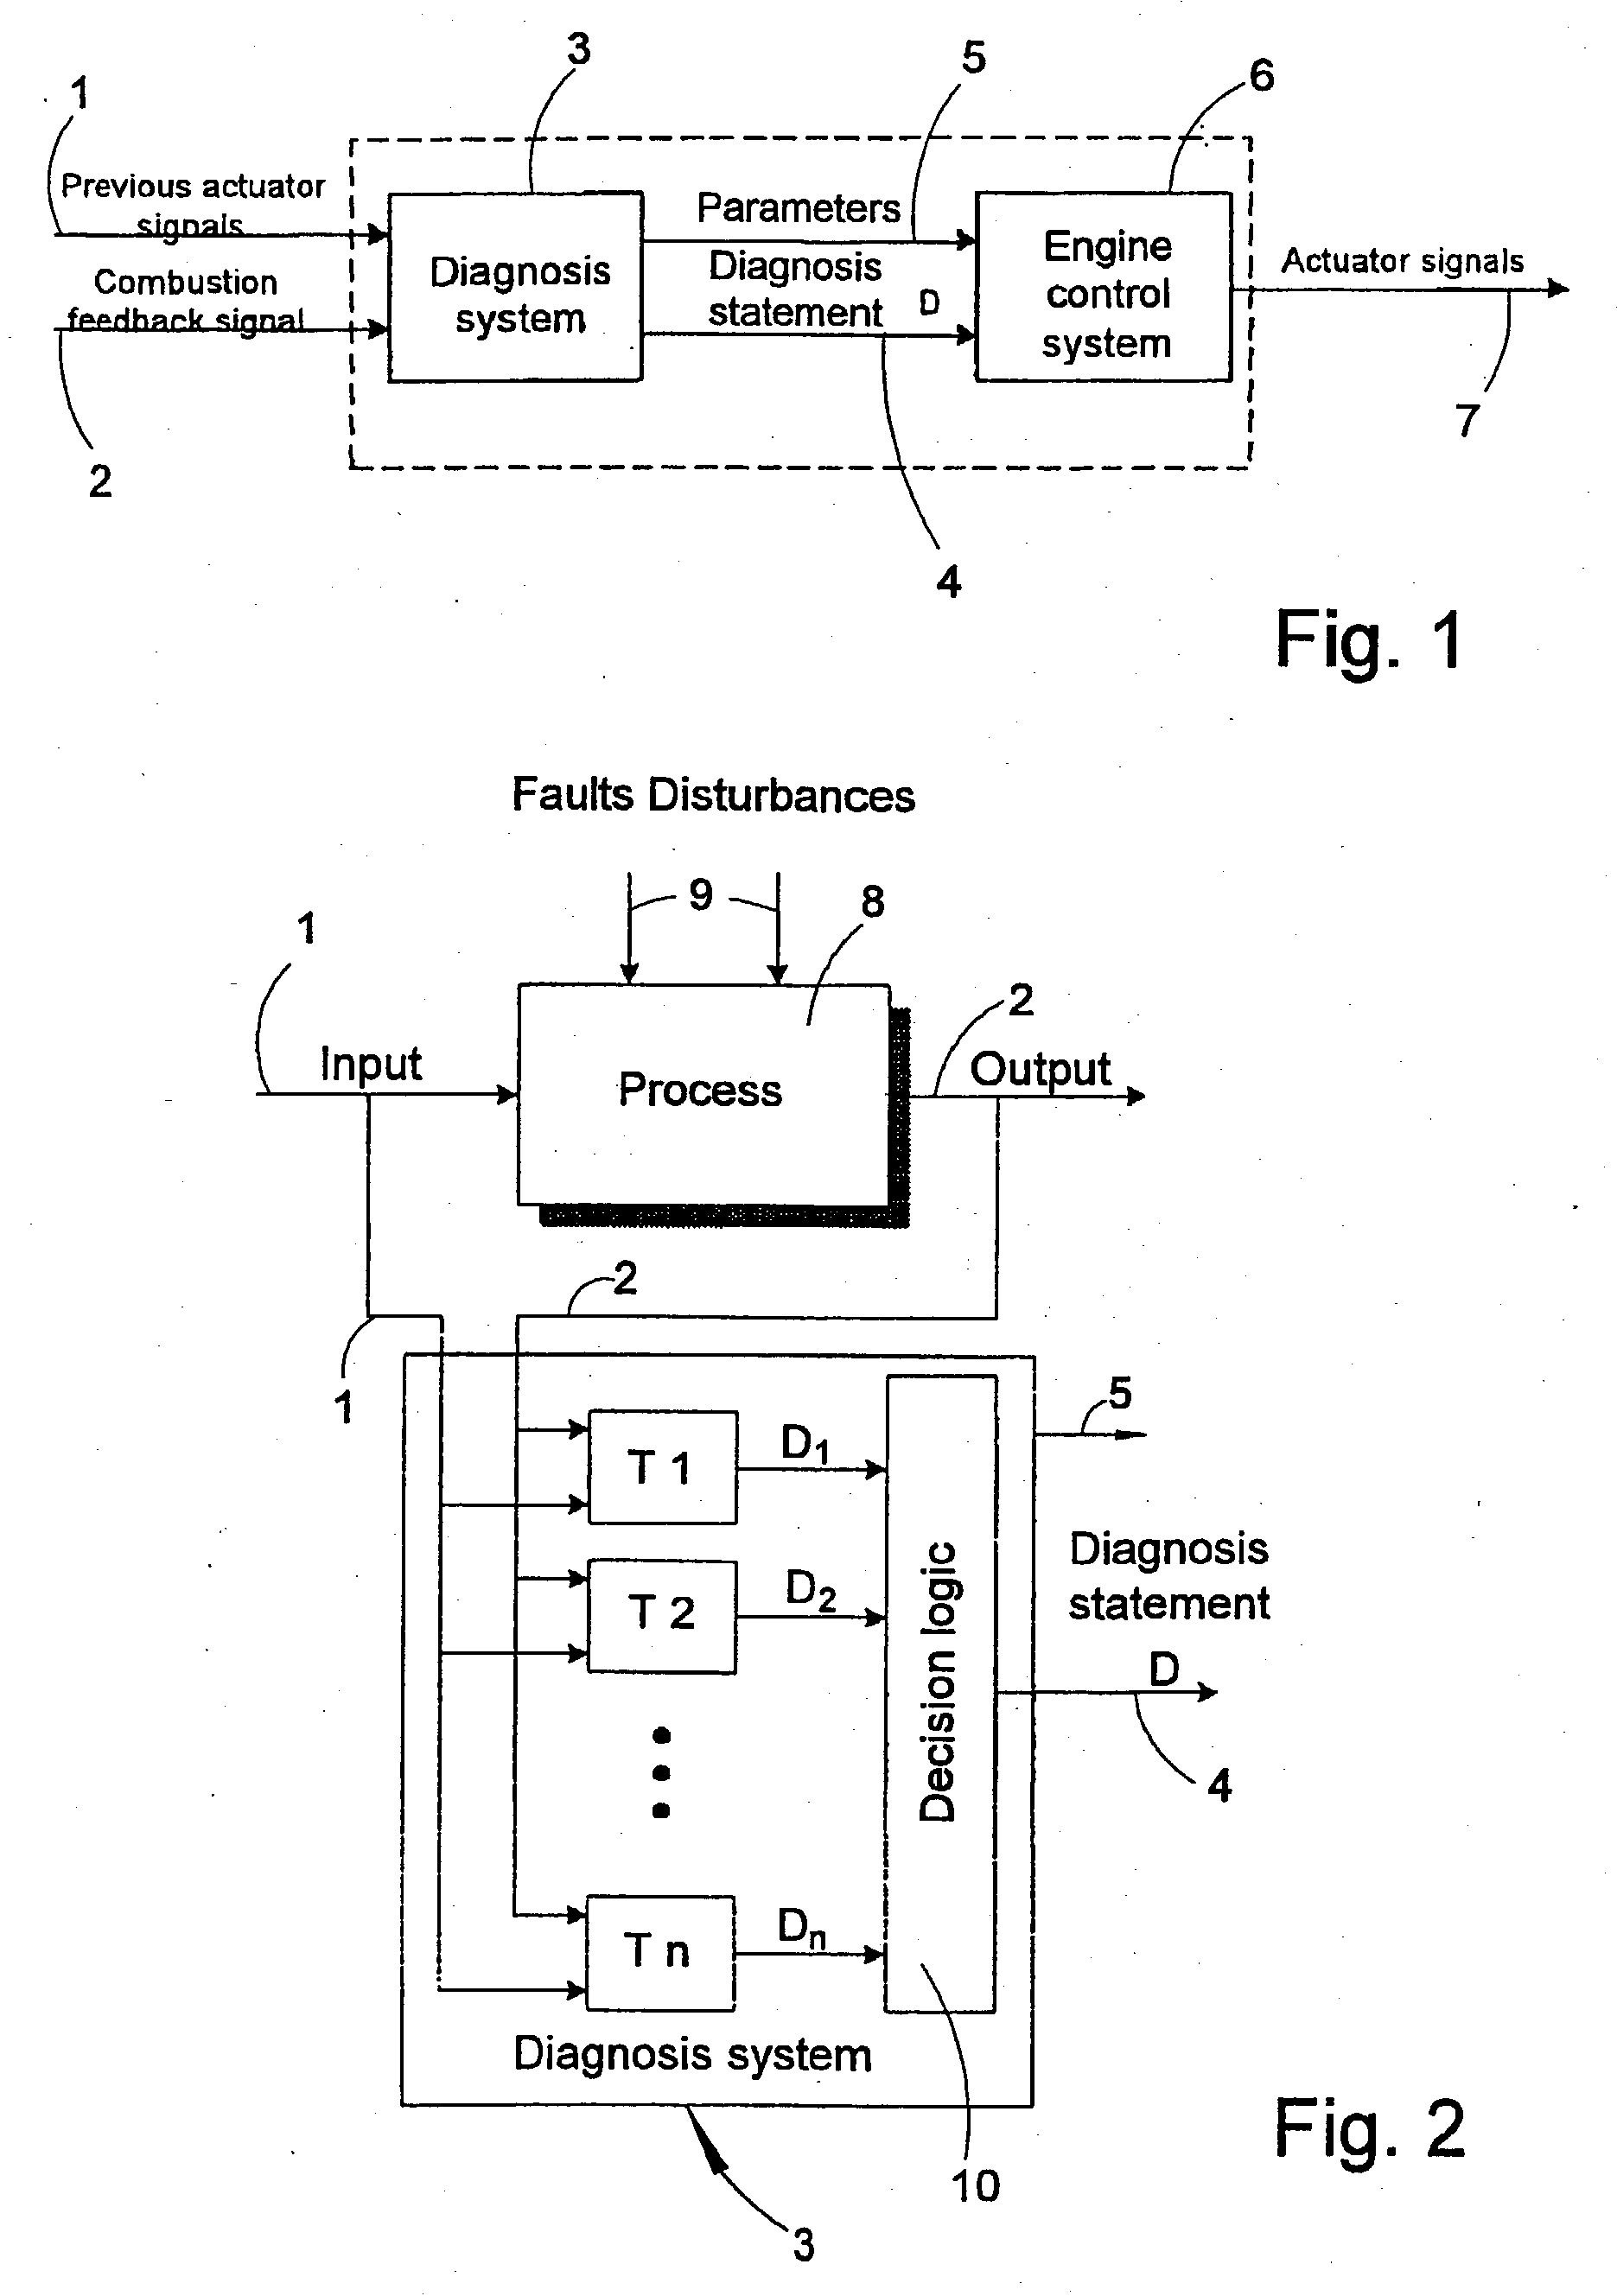 Method in connection with engine control